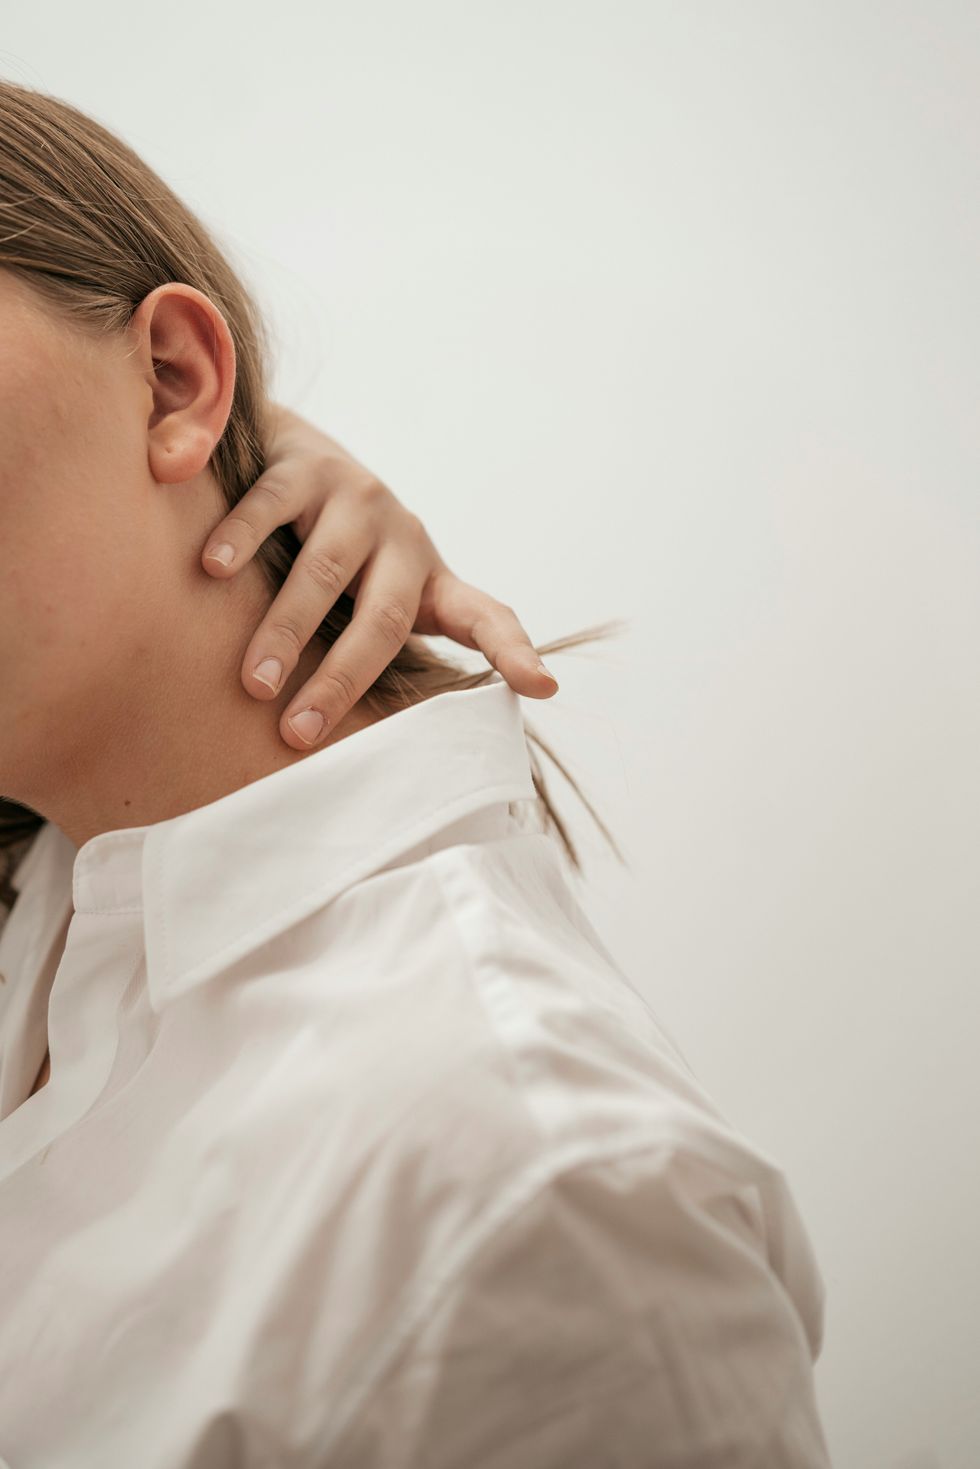 woman in a white shirt rubbing her neck